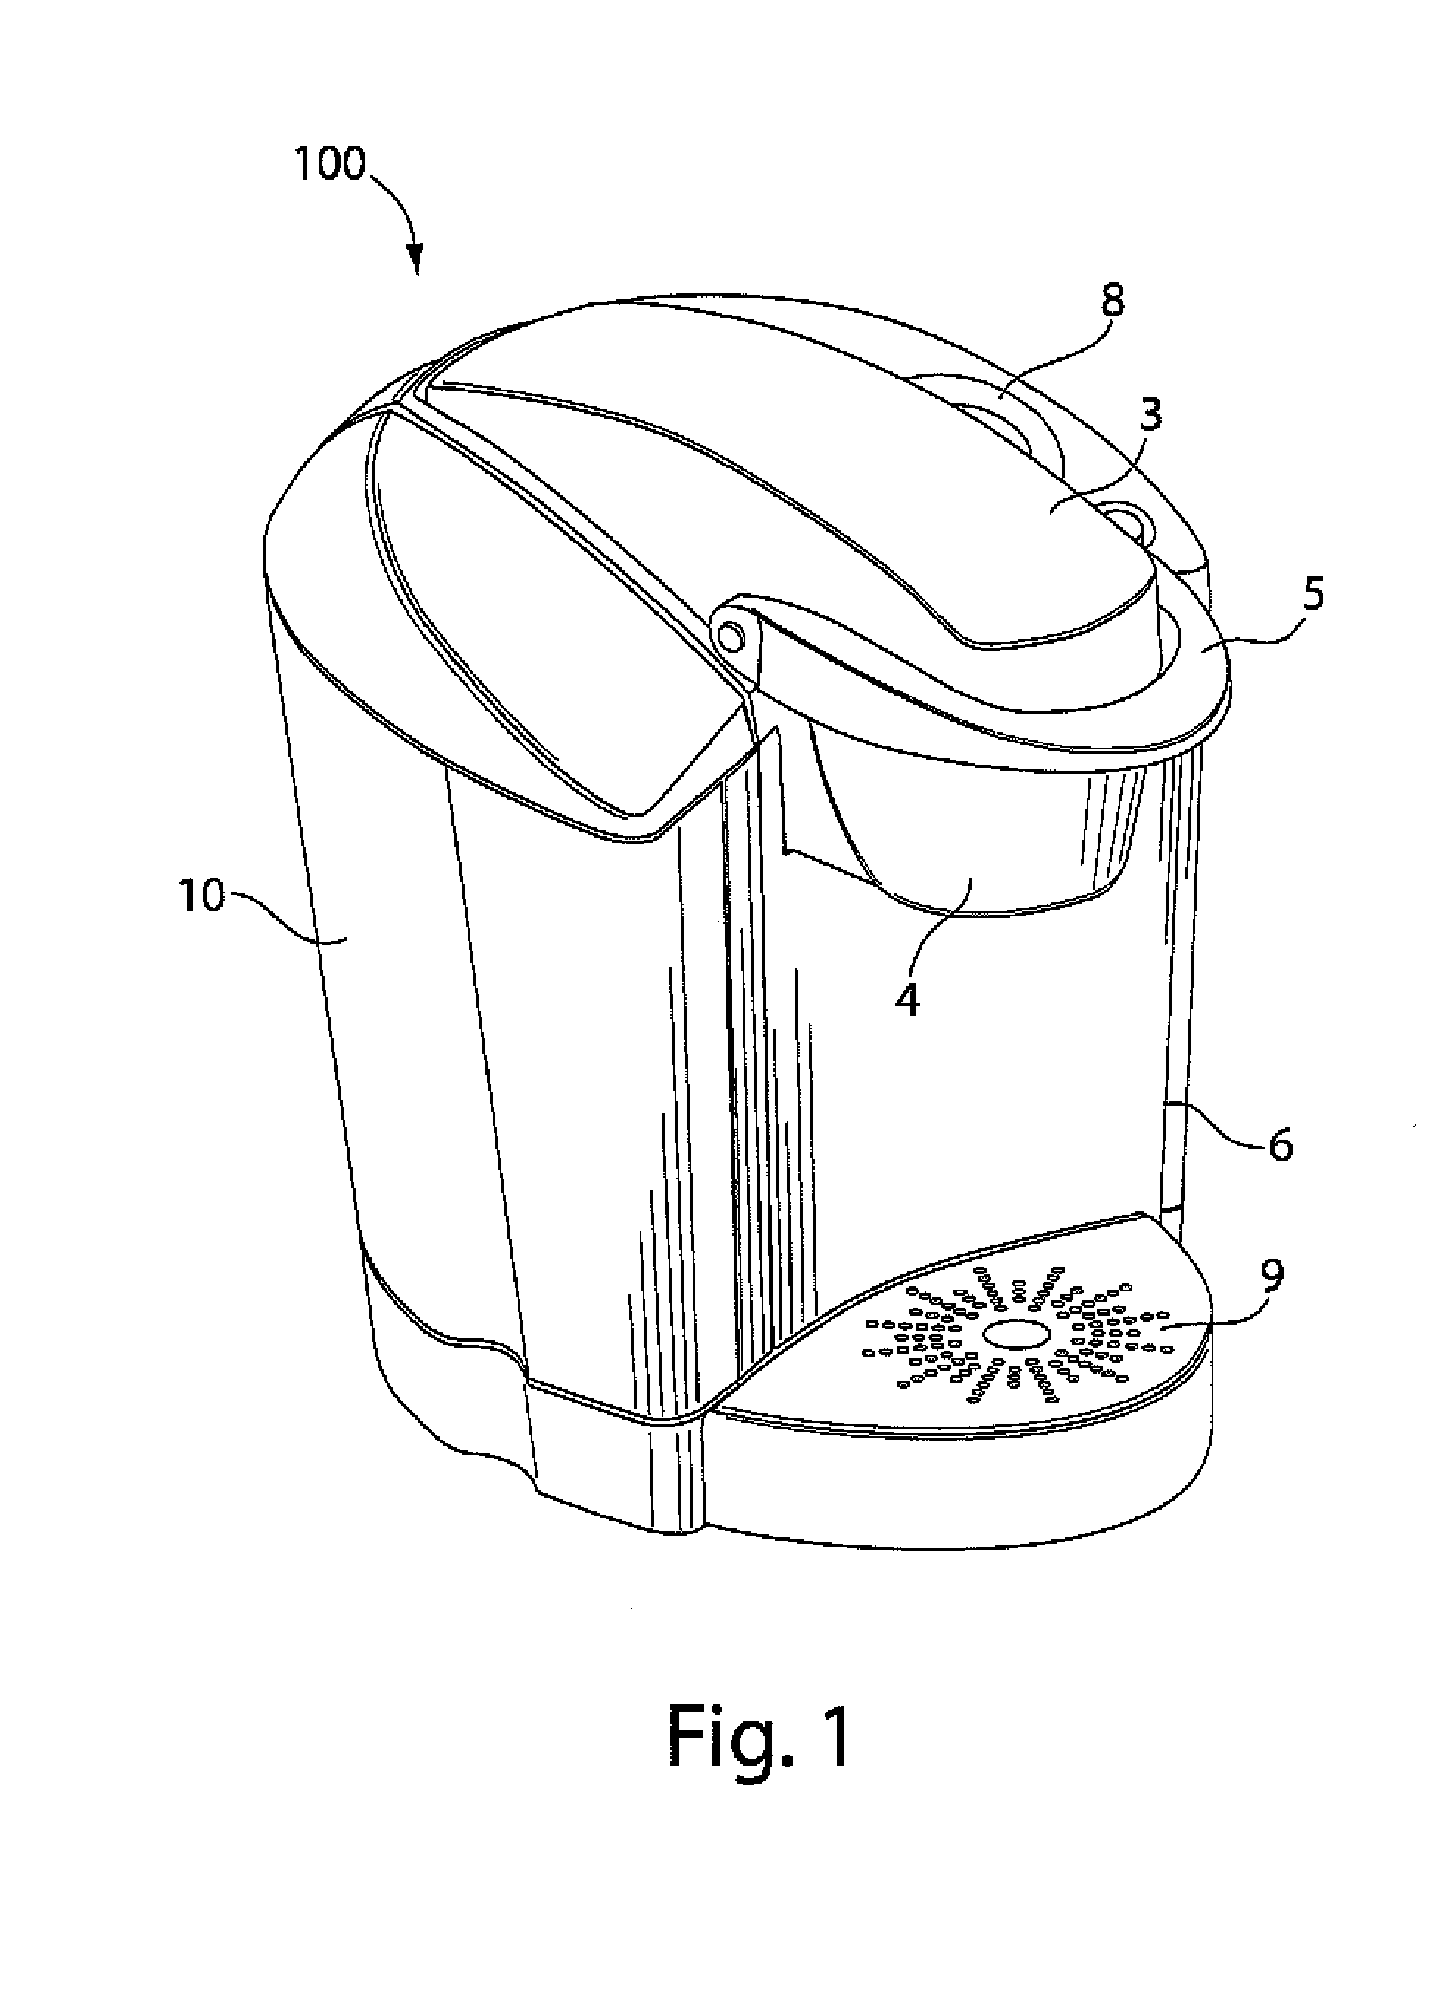 Beverage forming apparatus with centrifugal pump